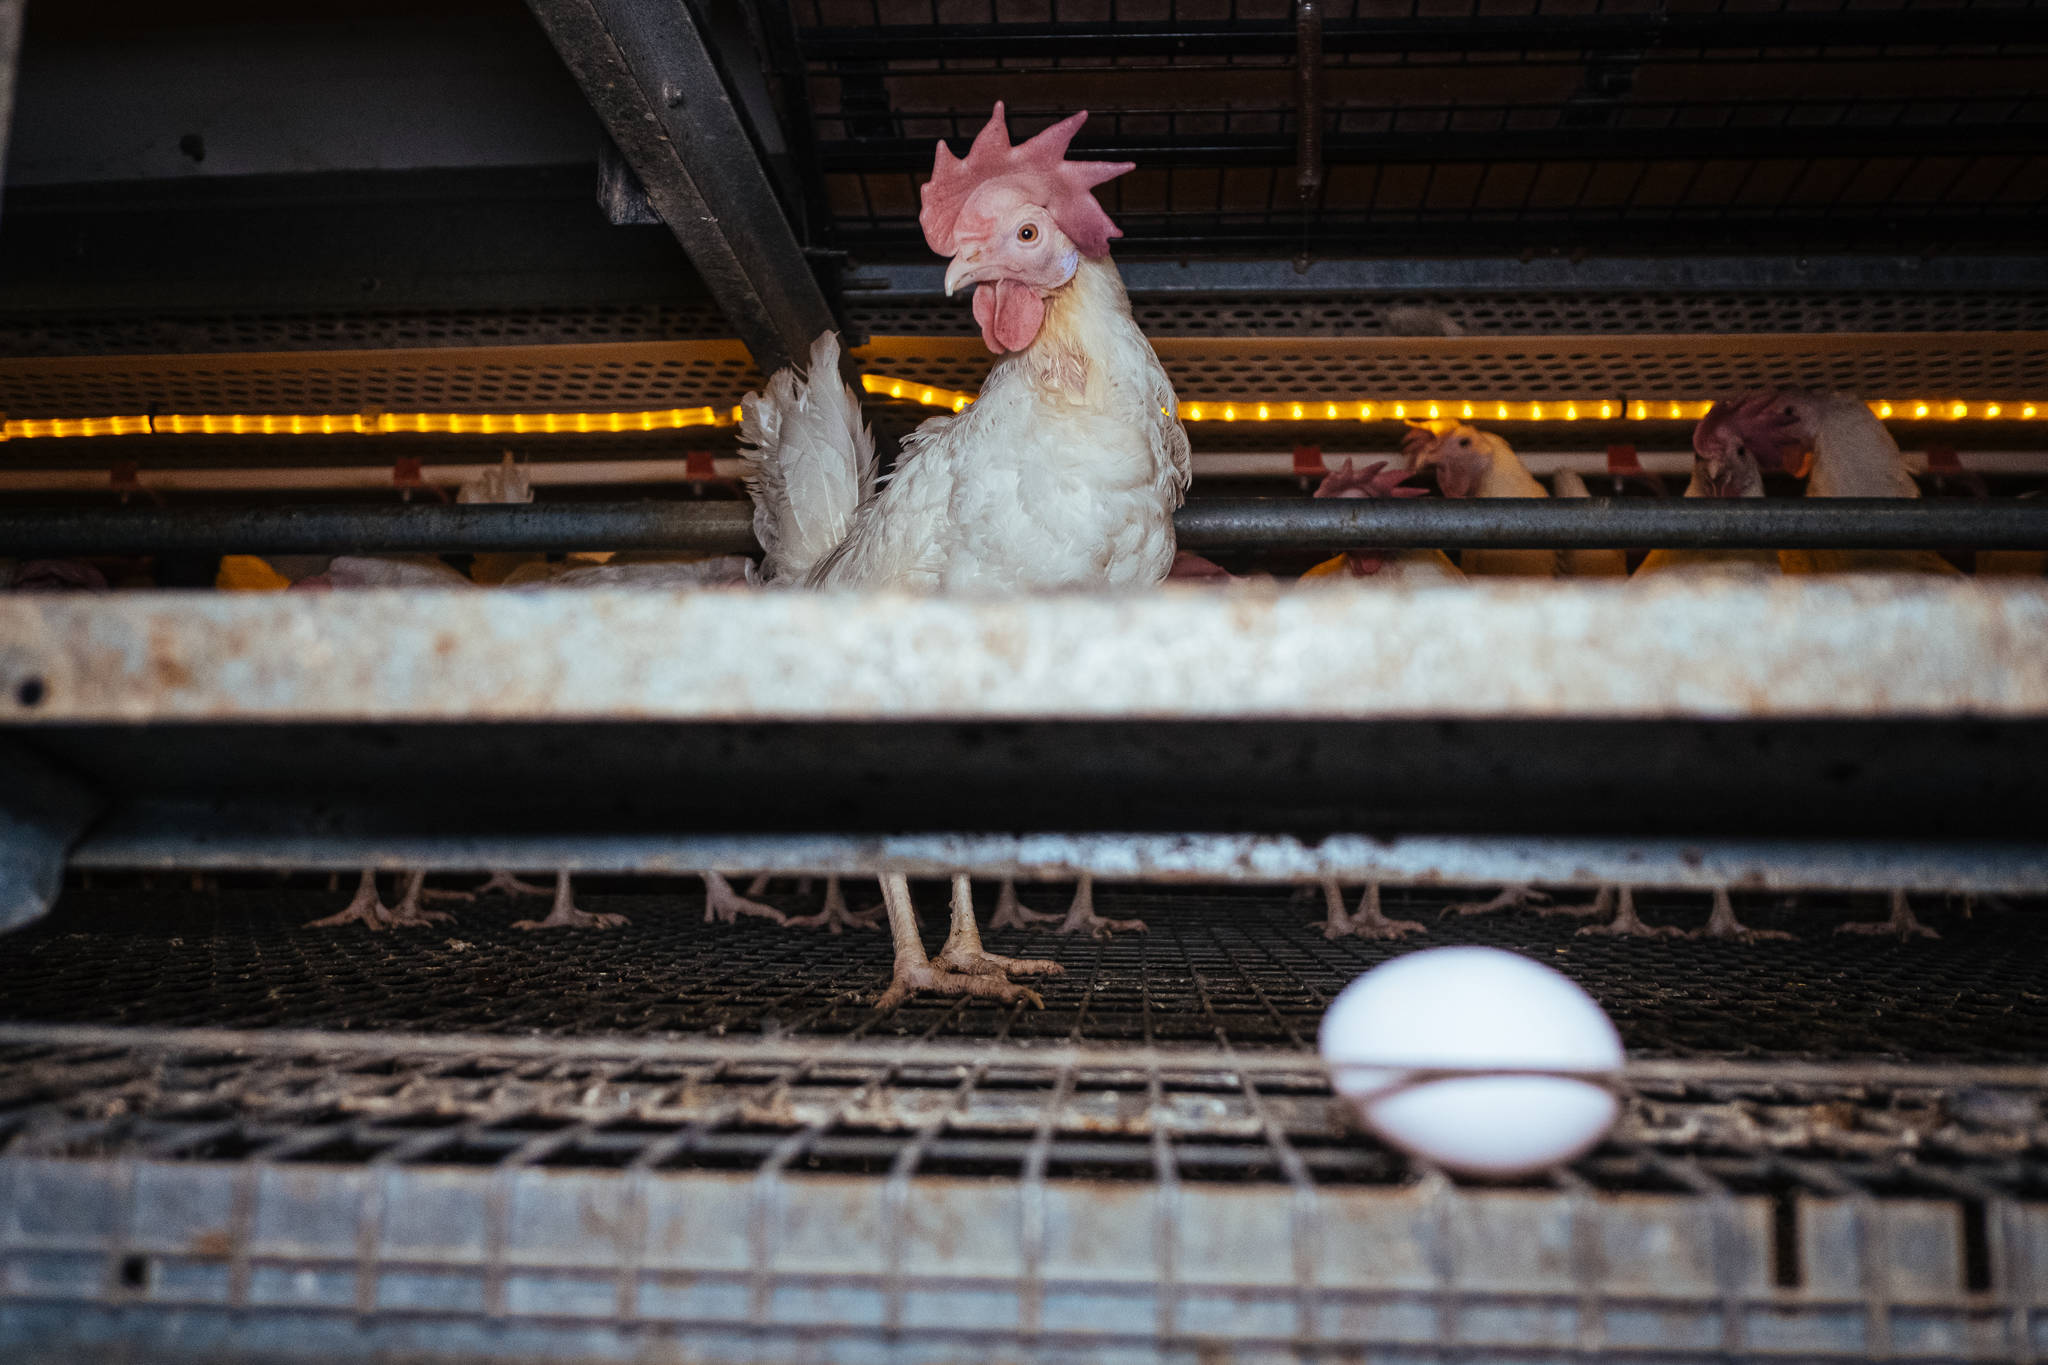 Egg laying chickens in a free-run barn. (Photo by: Clément Martz)